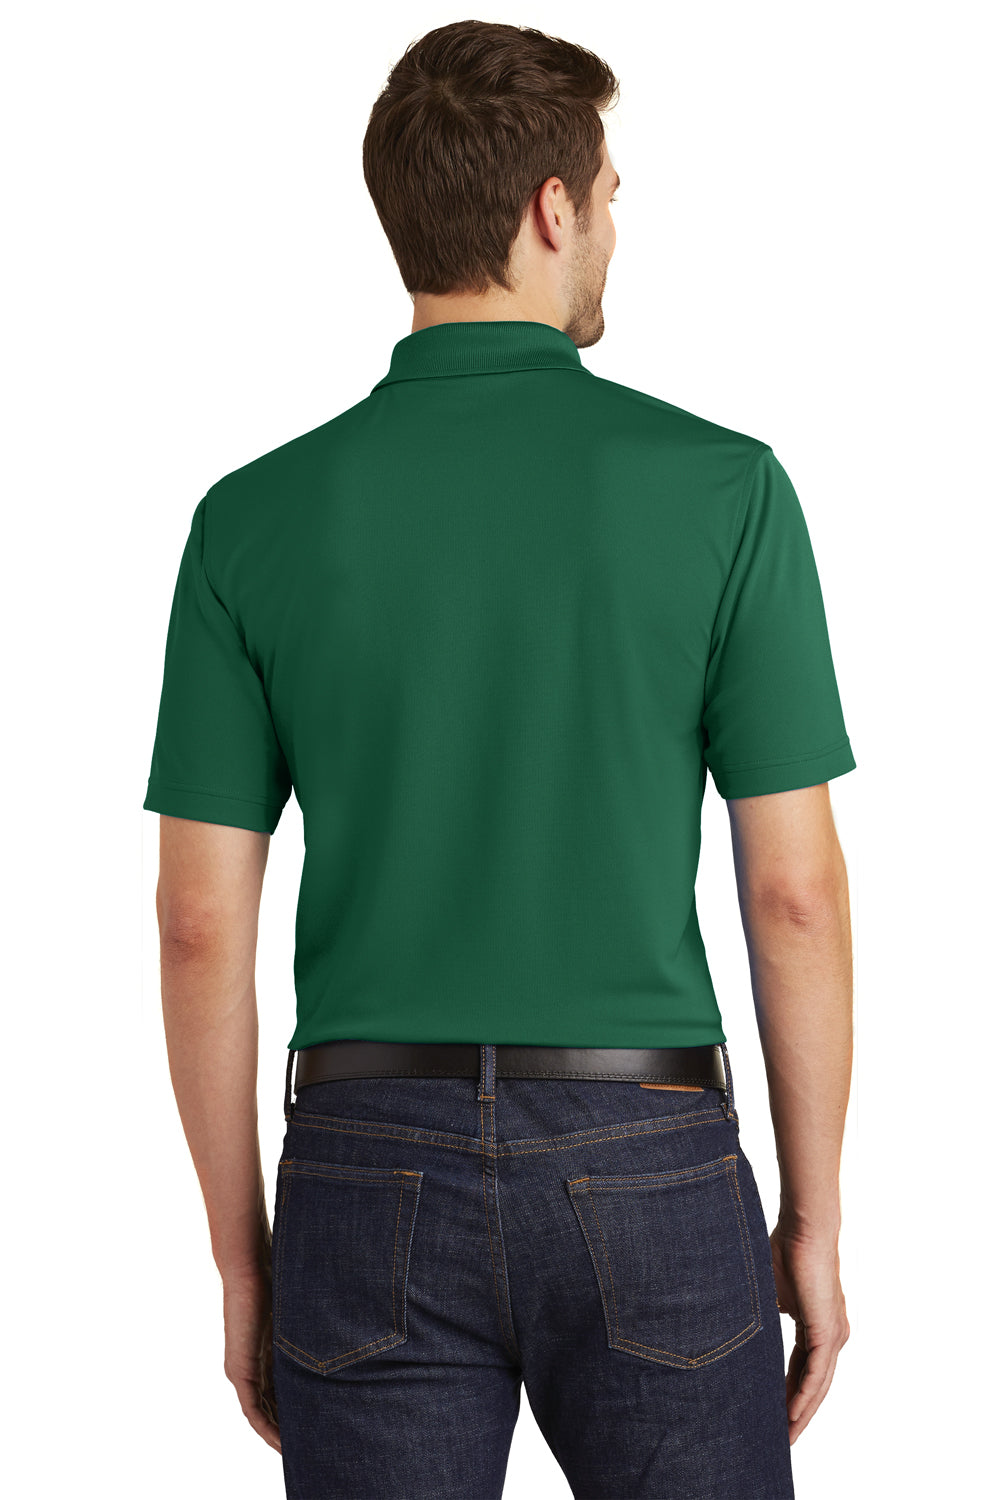 Port Authority K110 Mens Dry Zone Moisture Wicking Short Sleeve Polo Shirt Forest Green Back